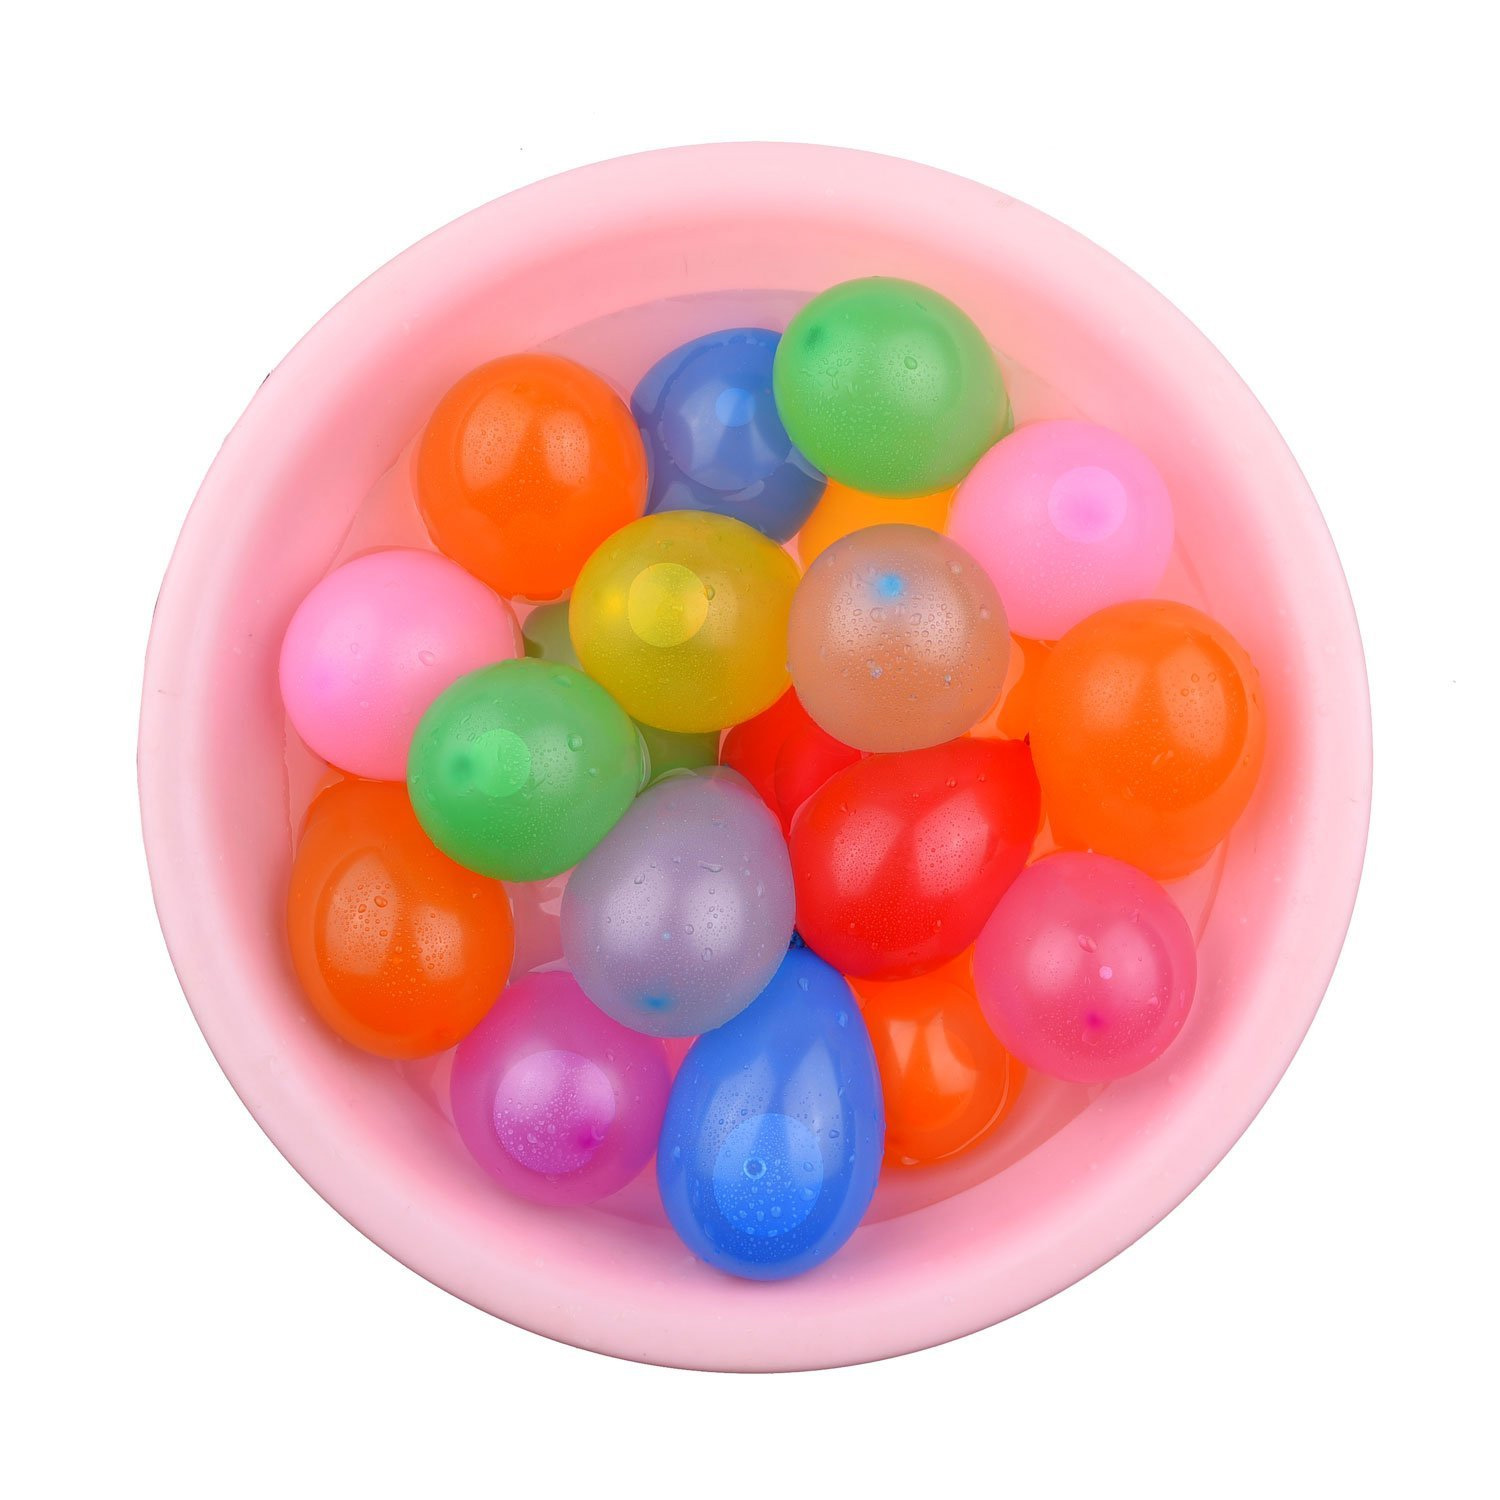 magic-water-balloons-fills-and-ties-balloons-instantly-includes-111